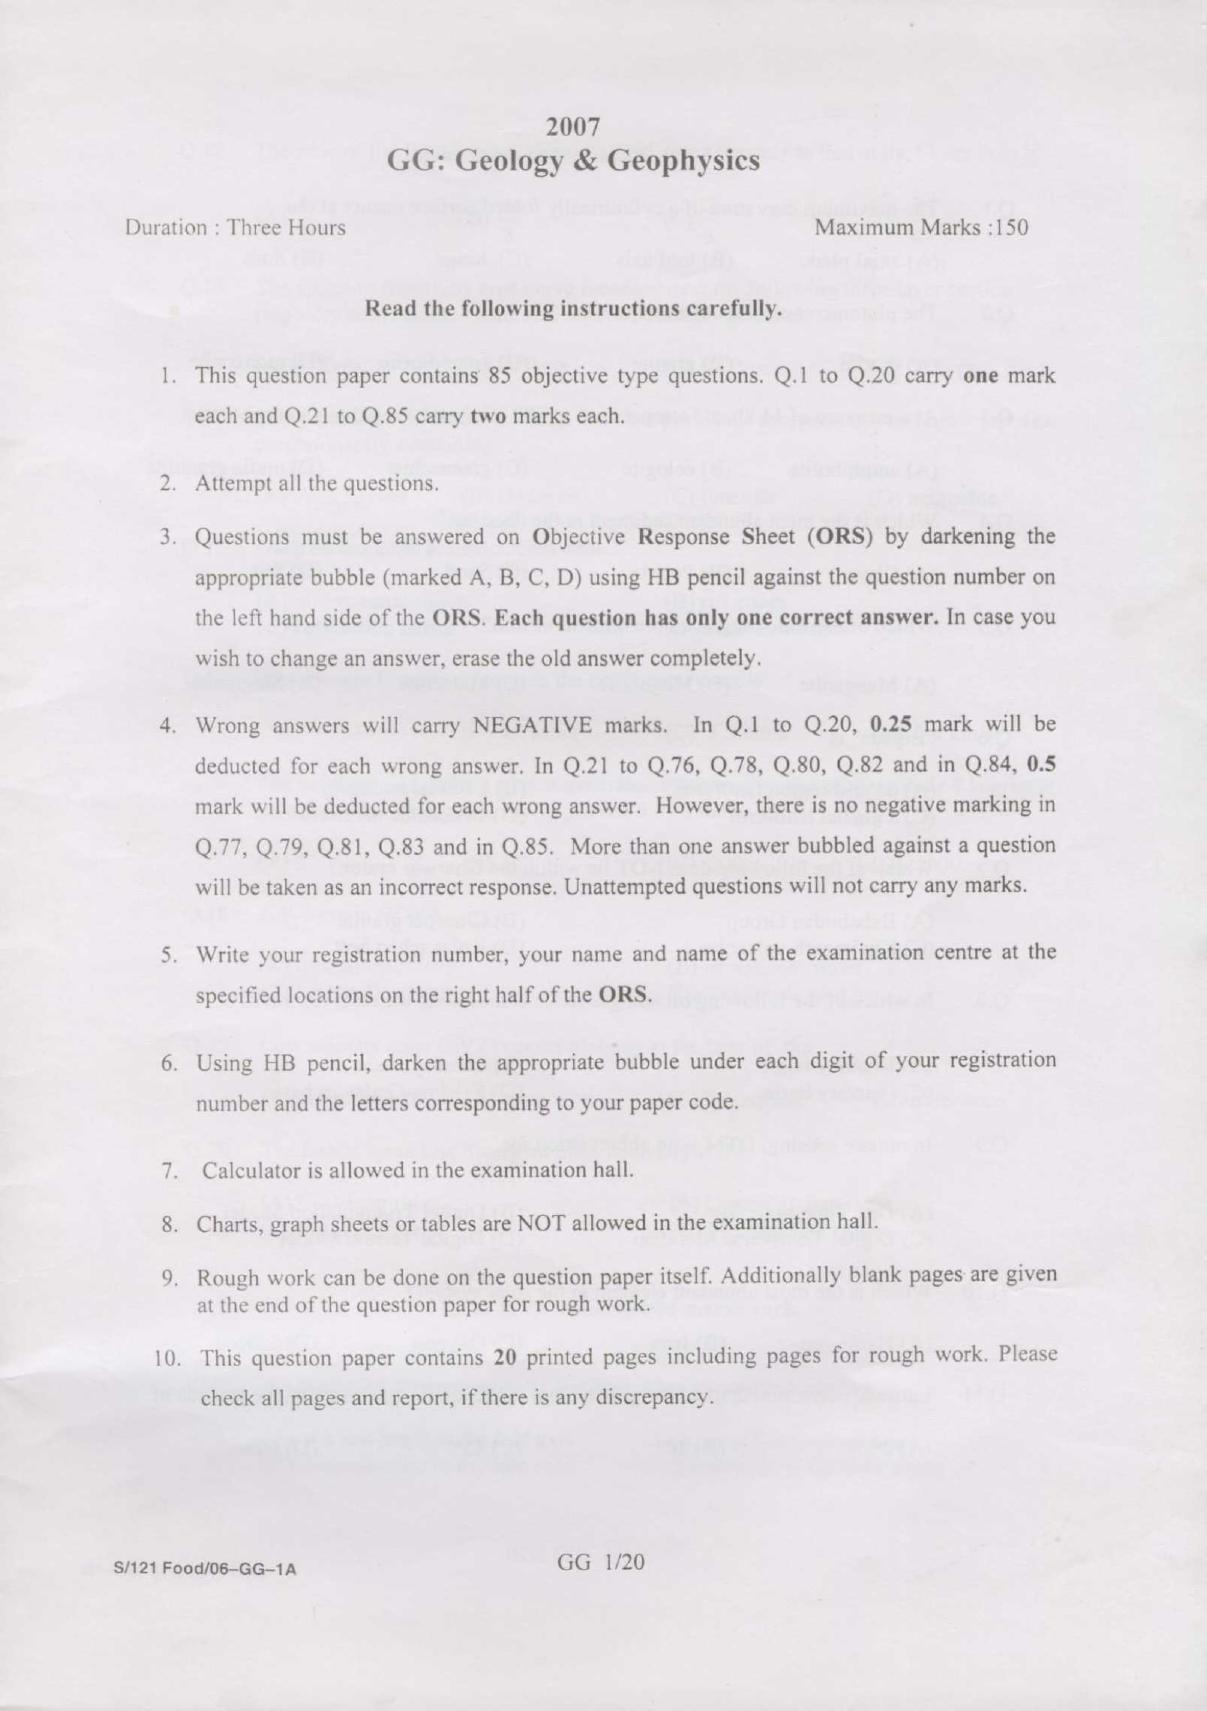 GATE 2007 Geology and Geophysics (GG) Question Paper with Answer Key - Page 1